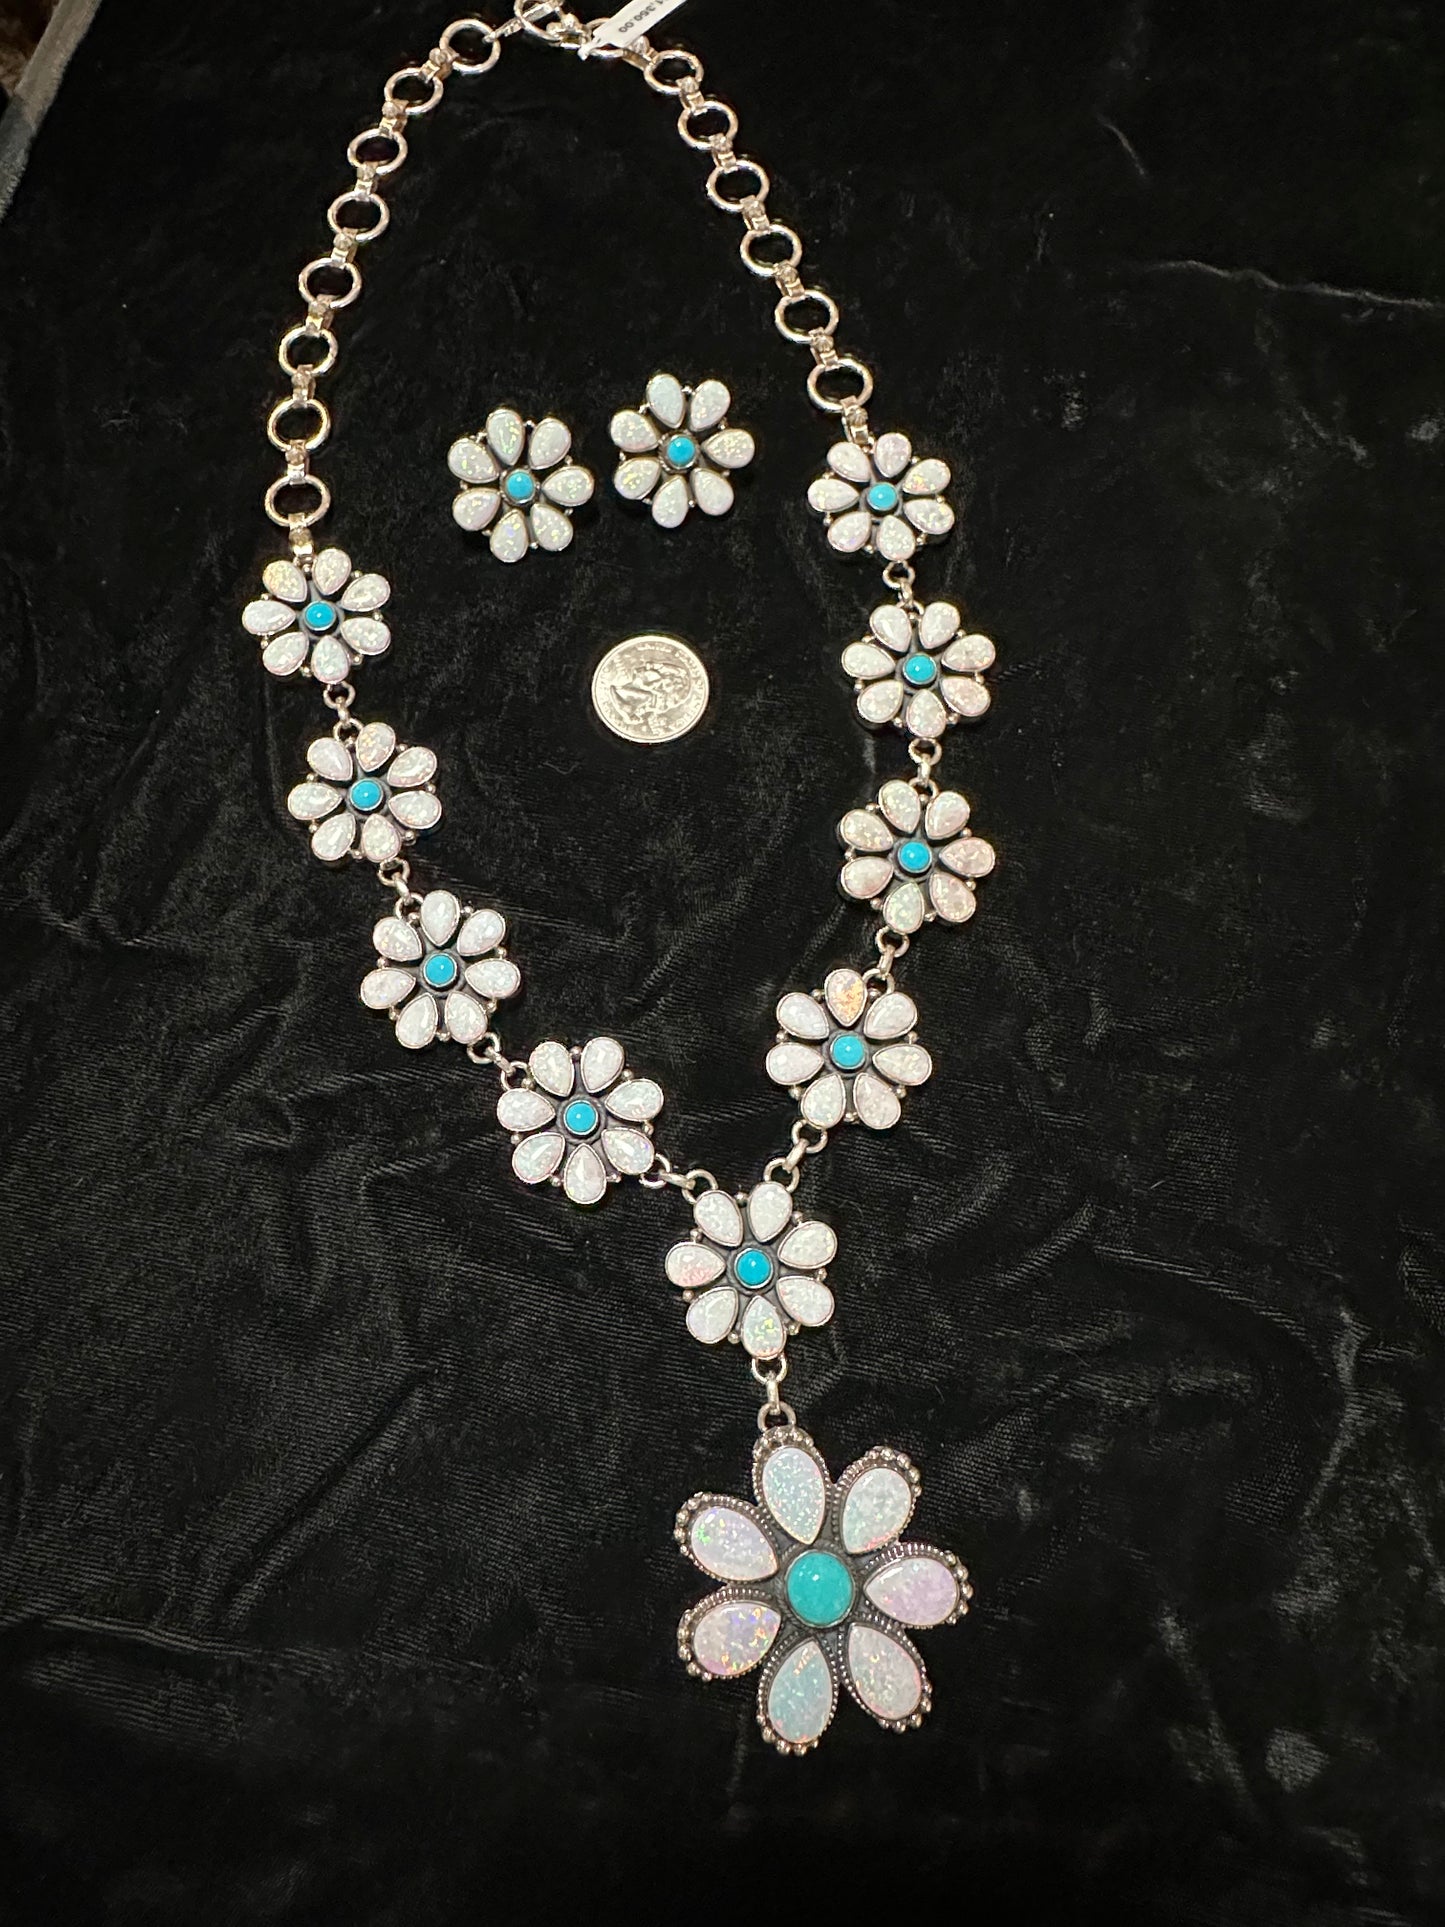 White Opal and Sleeping Beauty Turquoise Flower Lariat